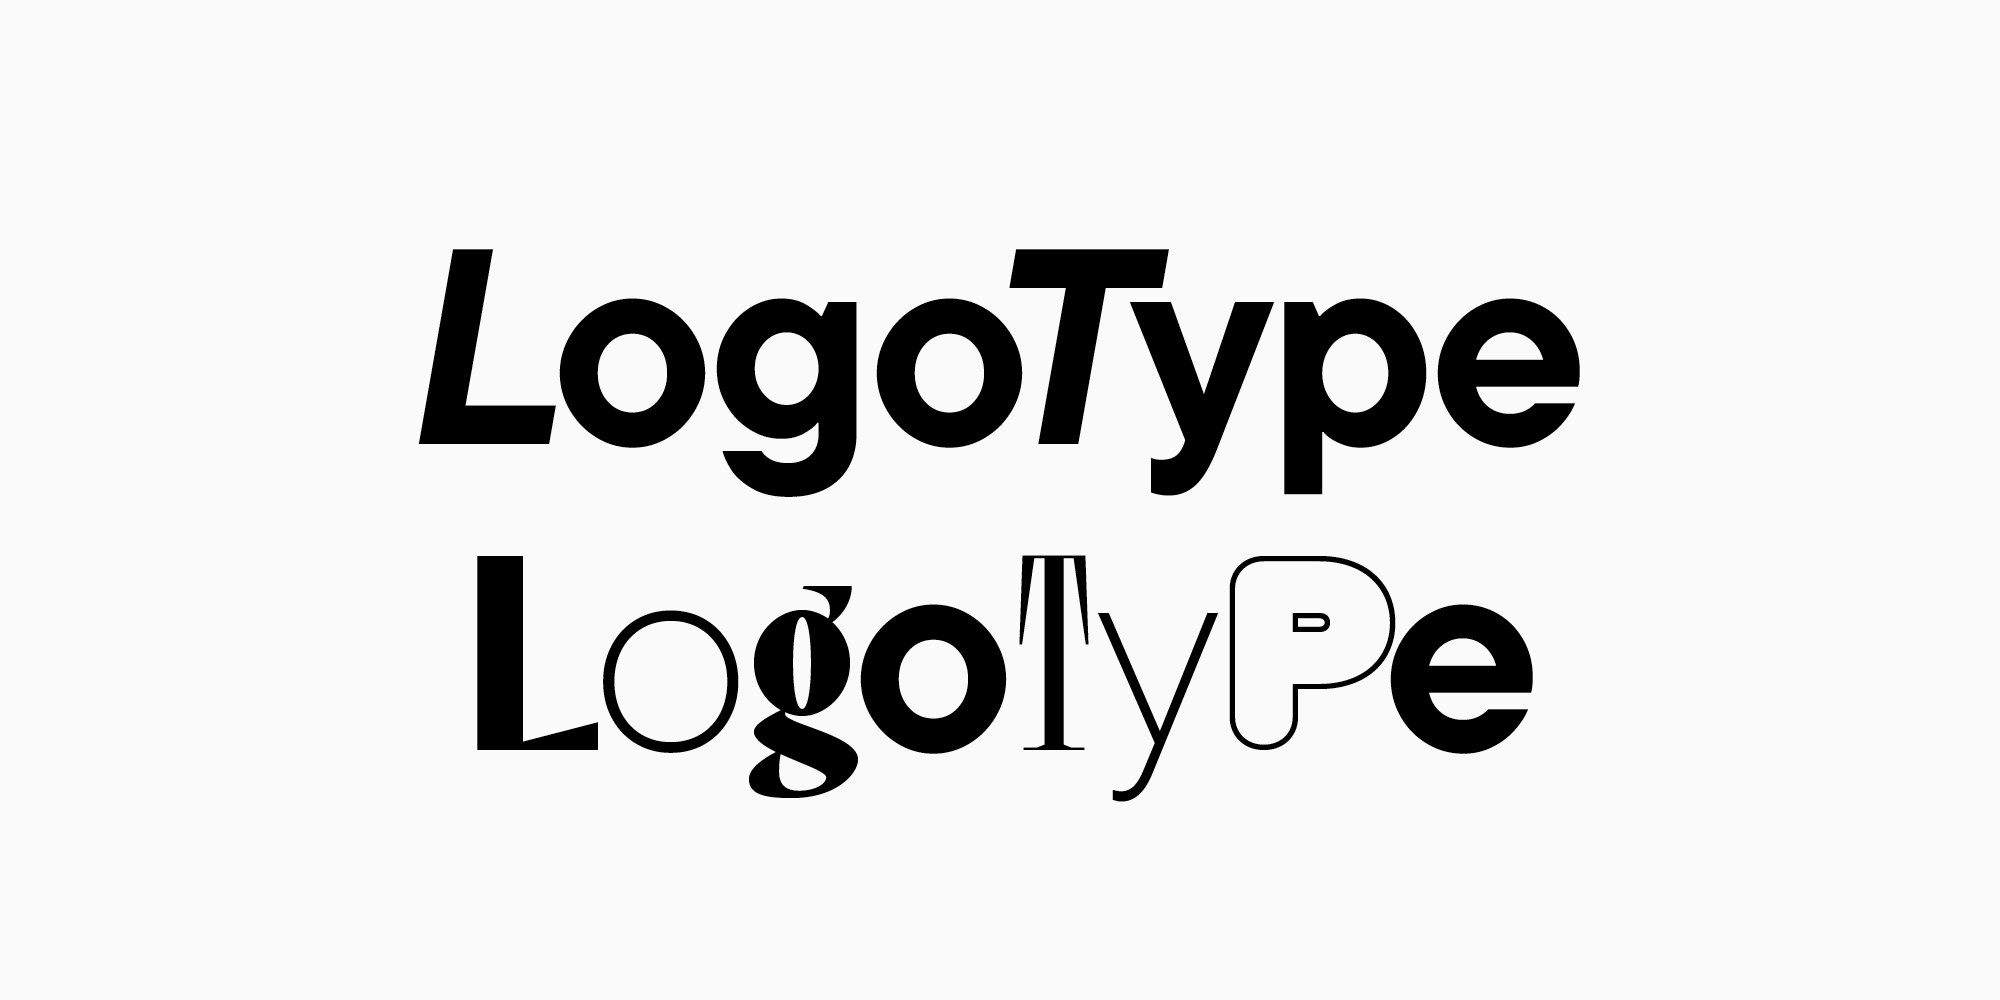 Fonts for Logotype